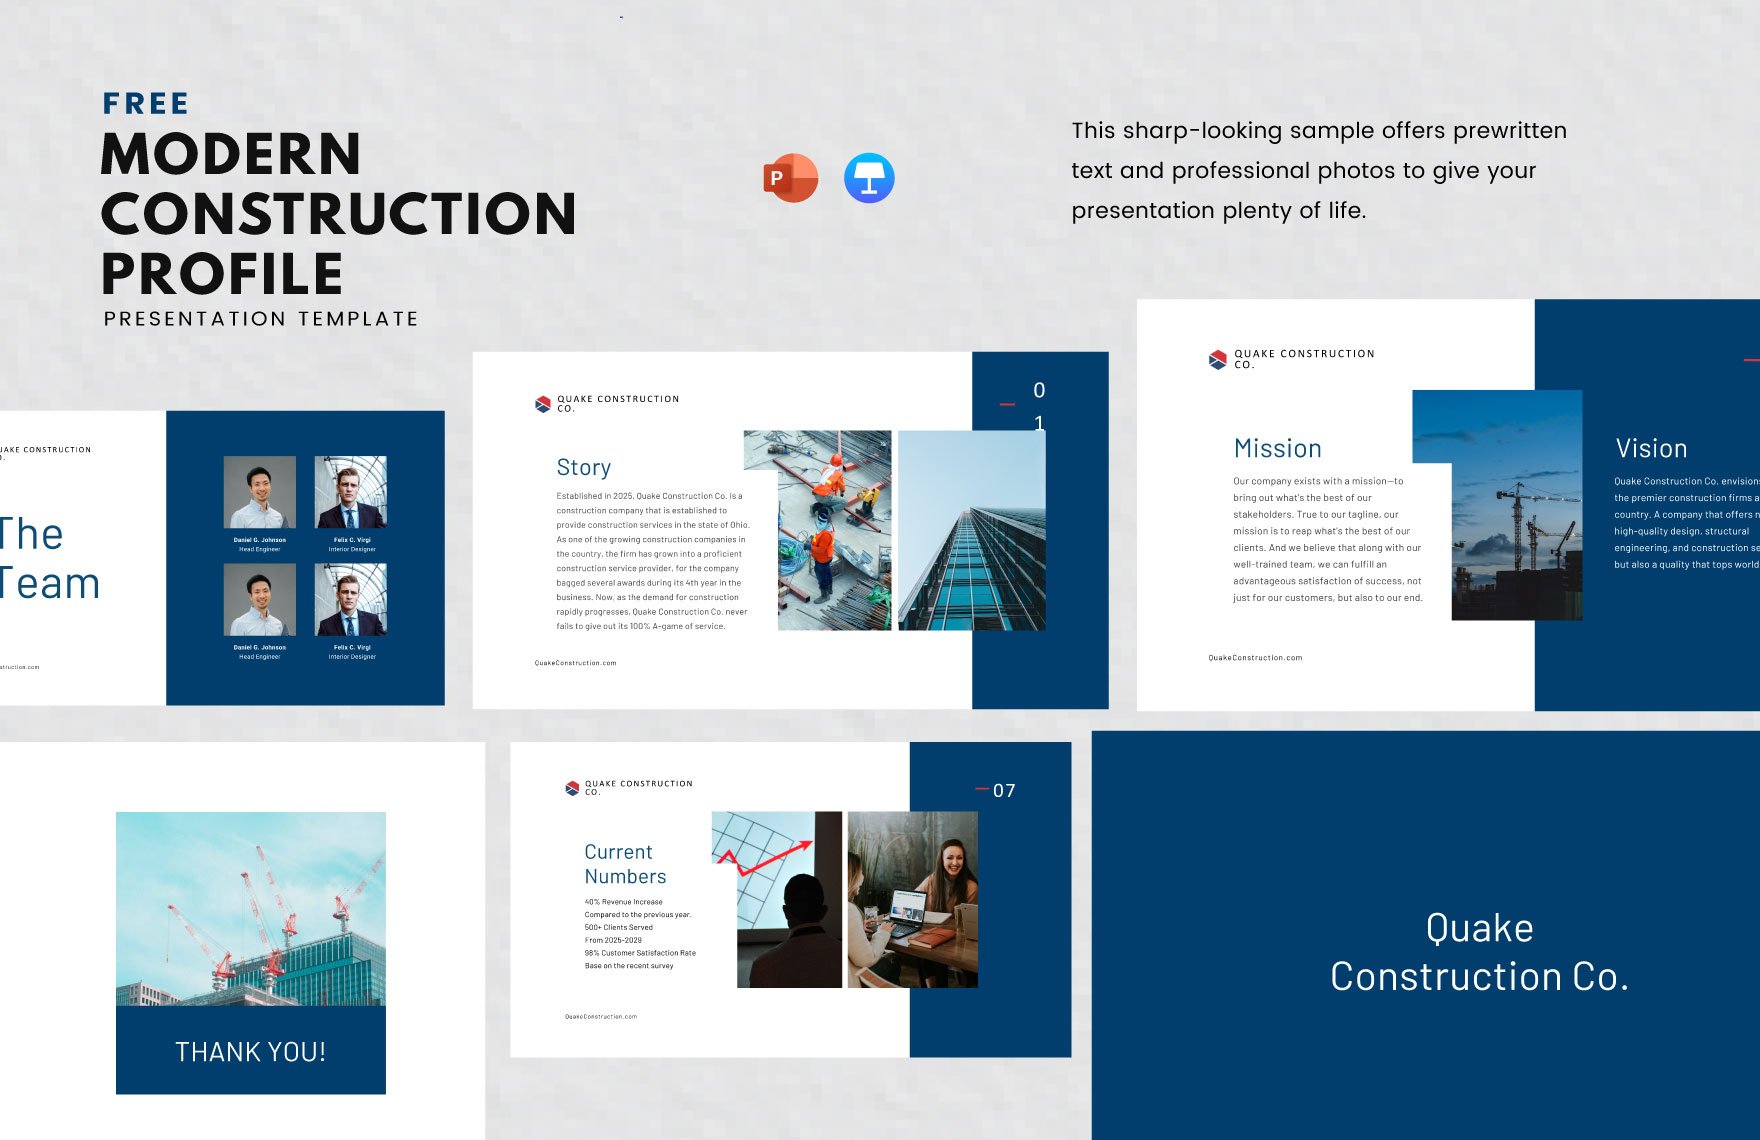 Free Modern Construction Profile Template